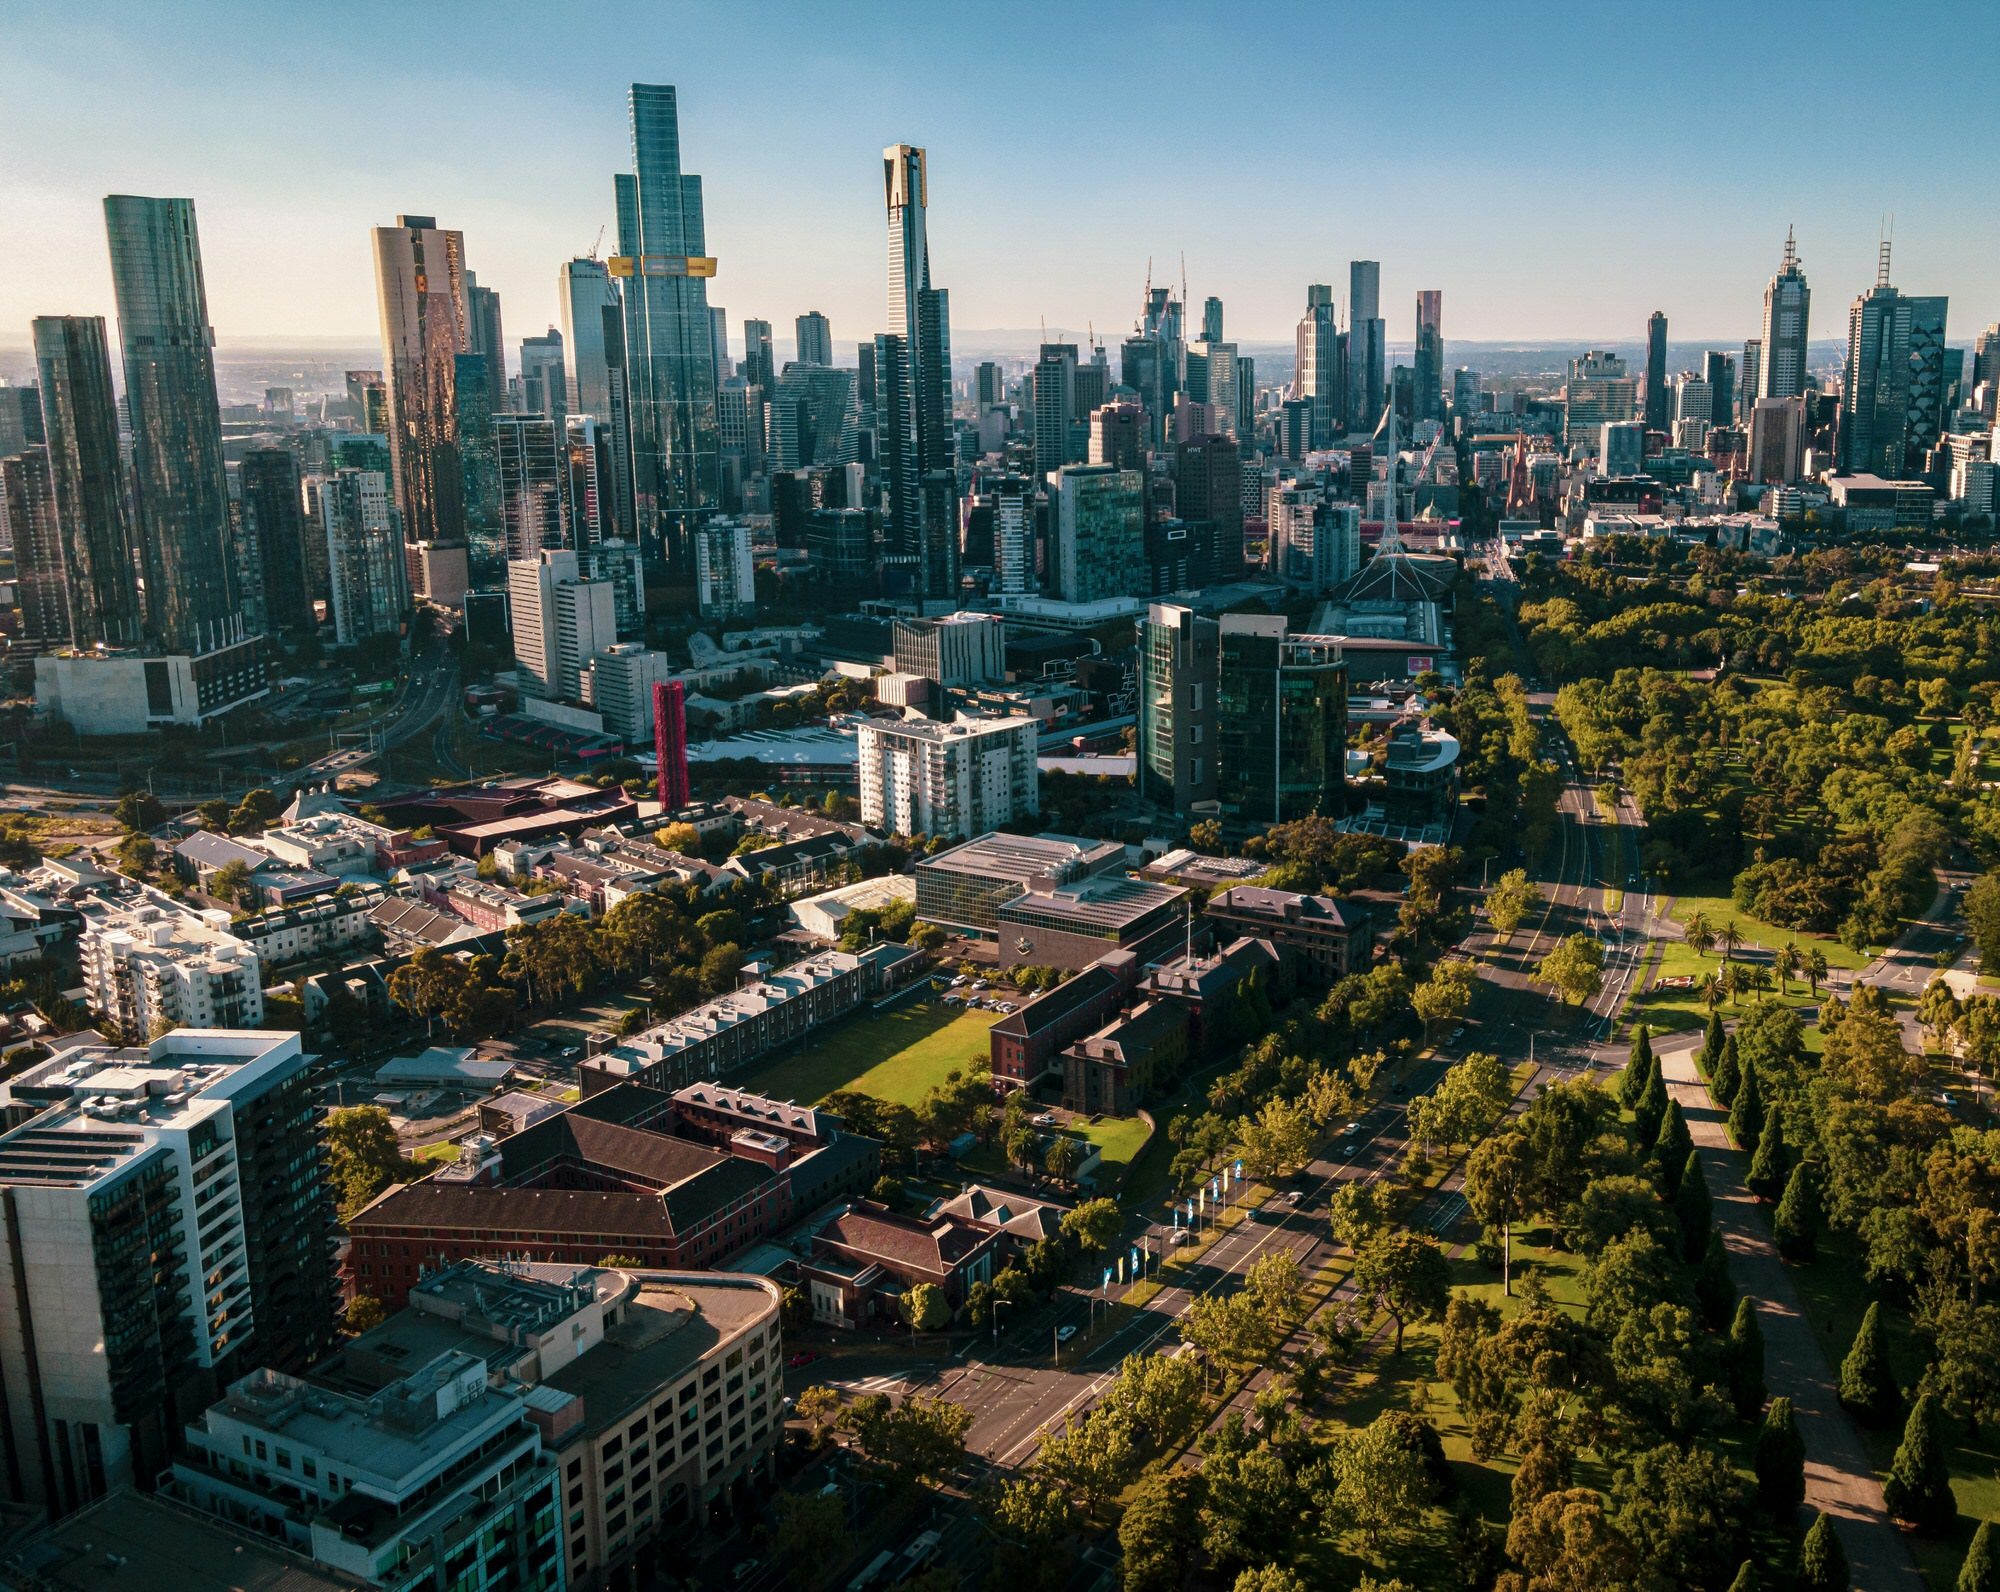 Aerial view of Melbourne city skyline with towering skyscrapers and green parkland.